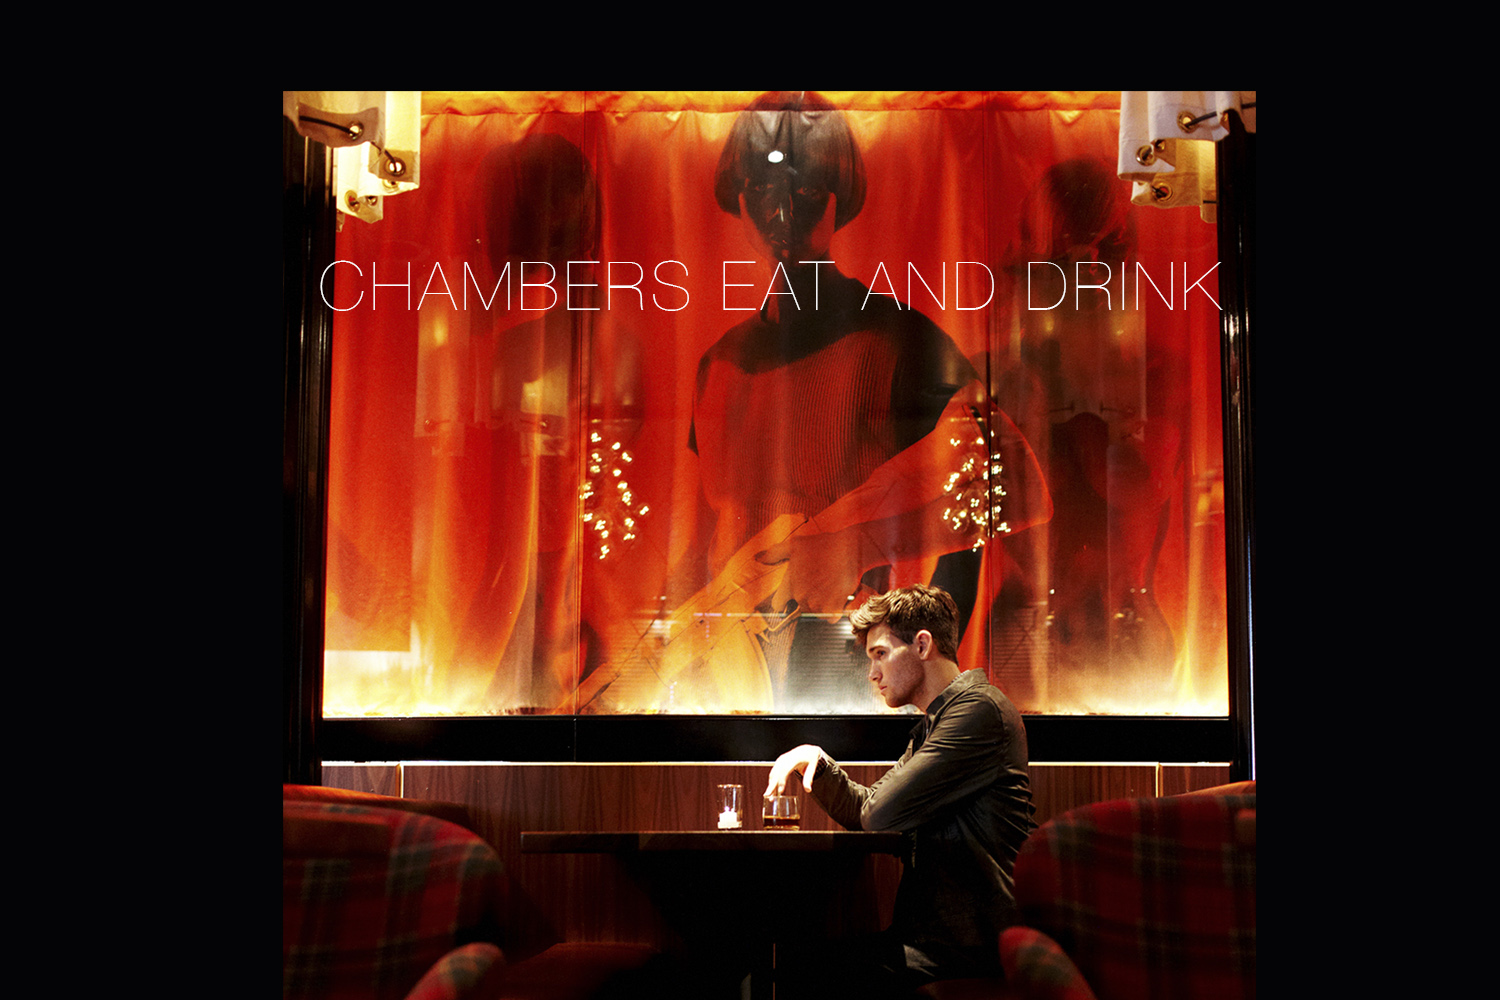 Chambers Eat and Drink, restaurant and lounge by Mister Important Design